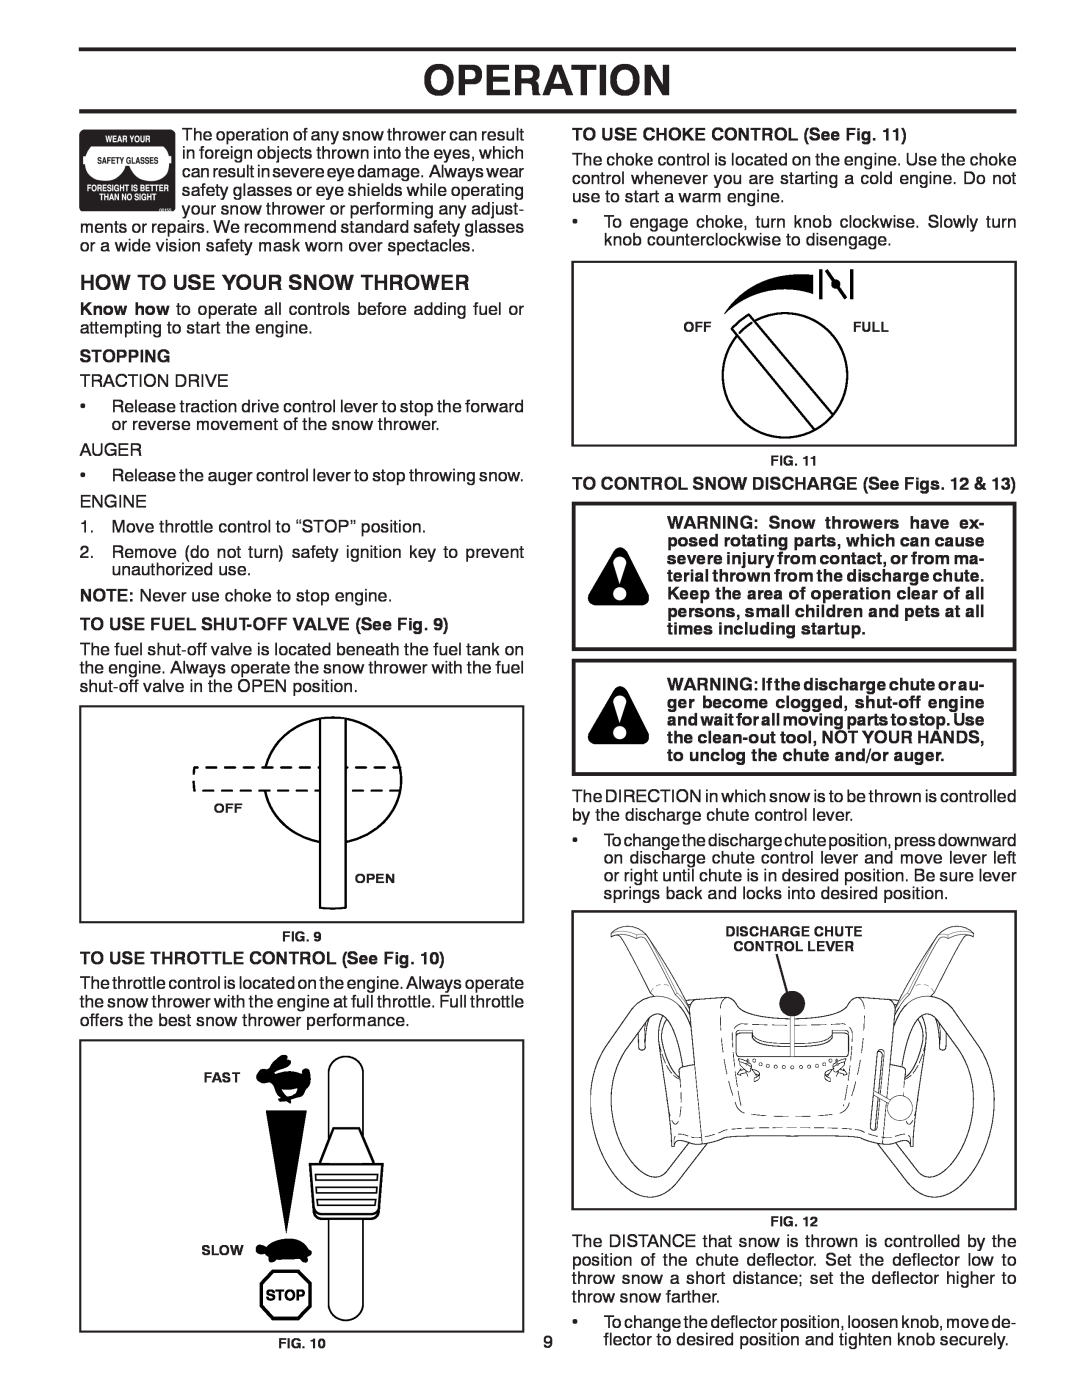 Poulan PR5524ES owner manual How To Use Your Snow Thrower, Operation, TO USE CHOKE CONTROL See Fig, Stopping 